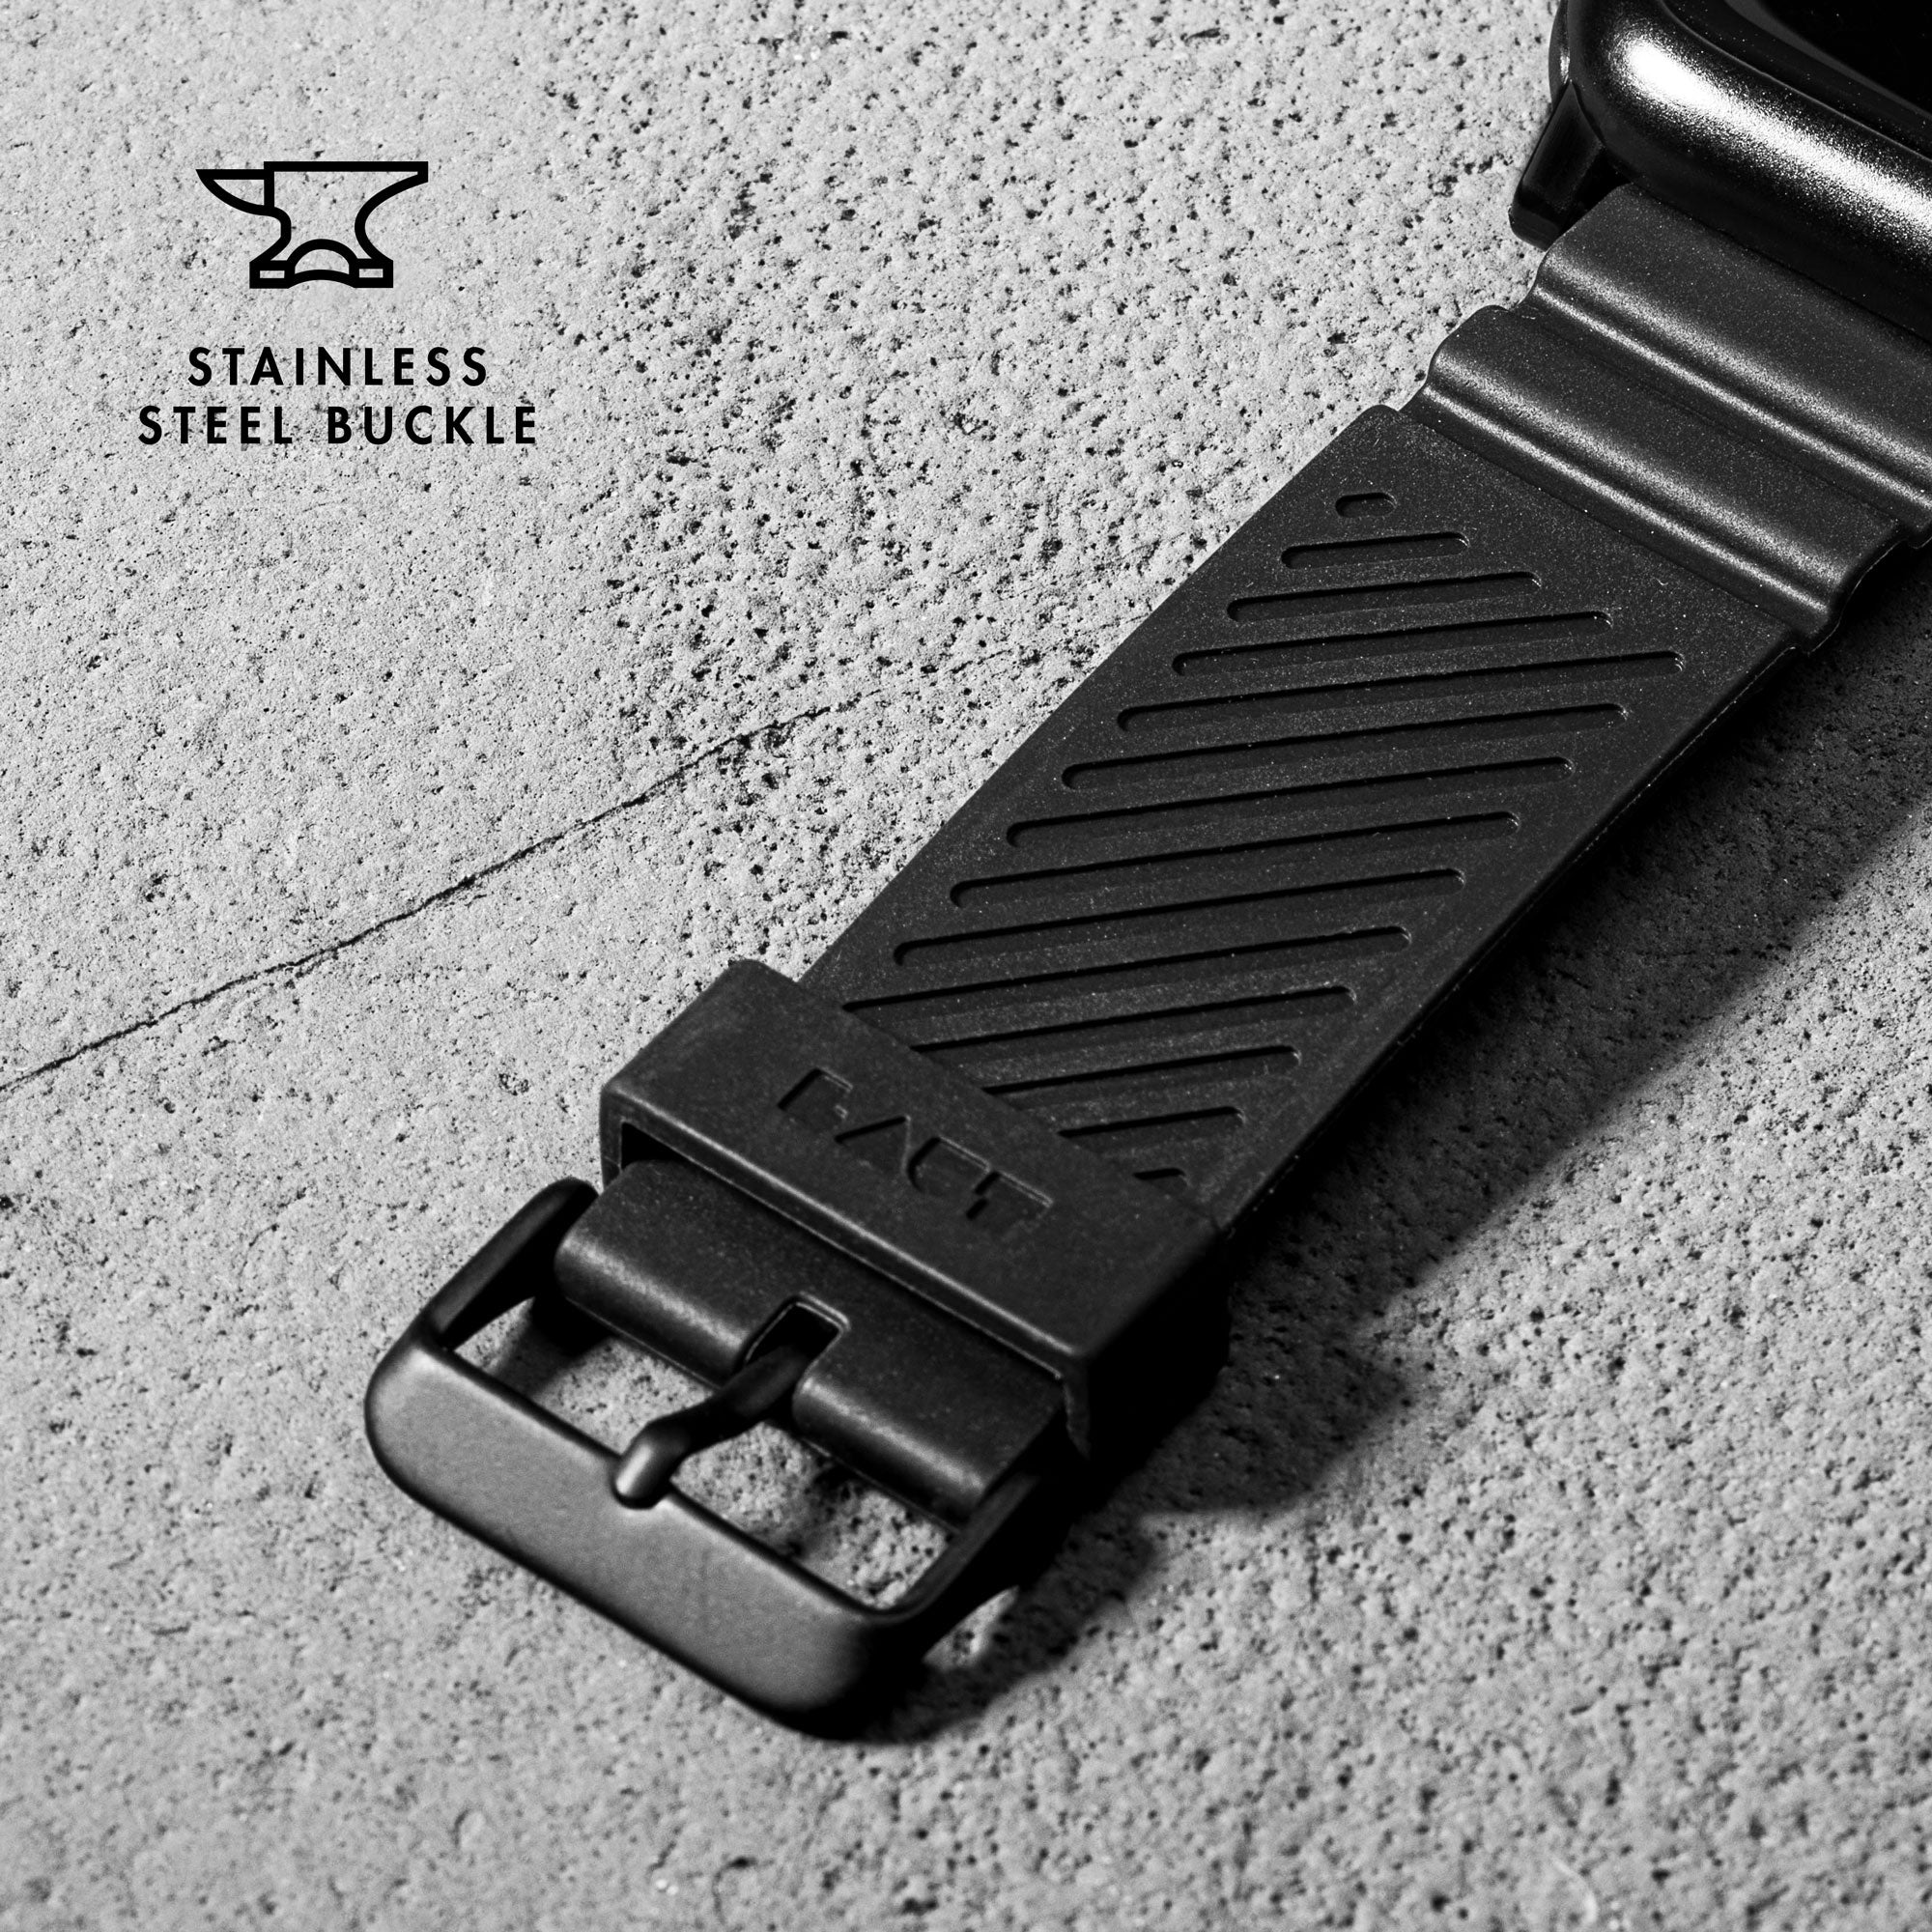 LAUT AW IMPKT Watch Strap for Apple Watch - Stainless Steel Buckle & Connectors